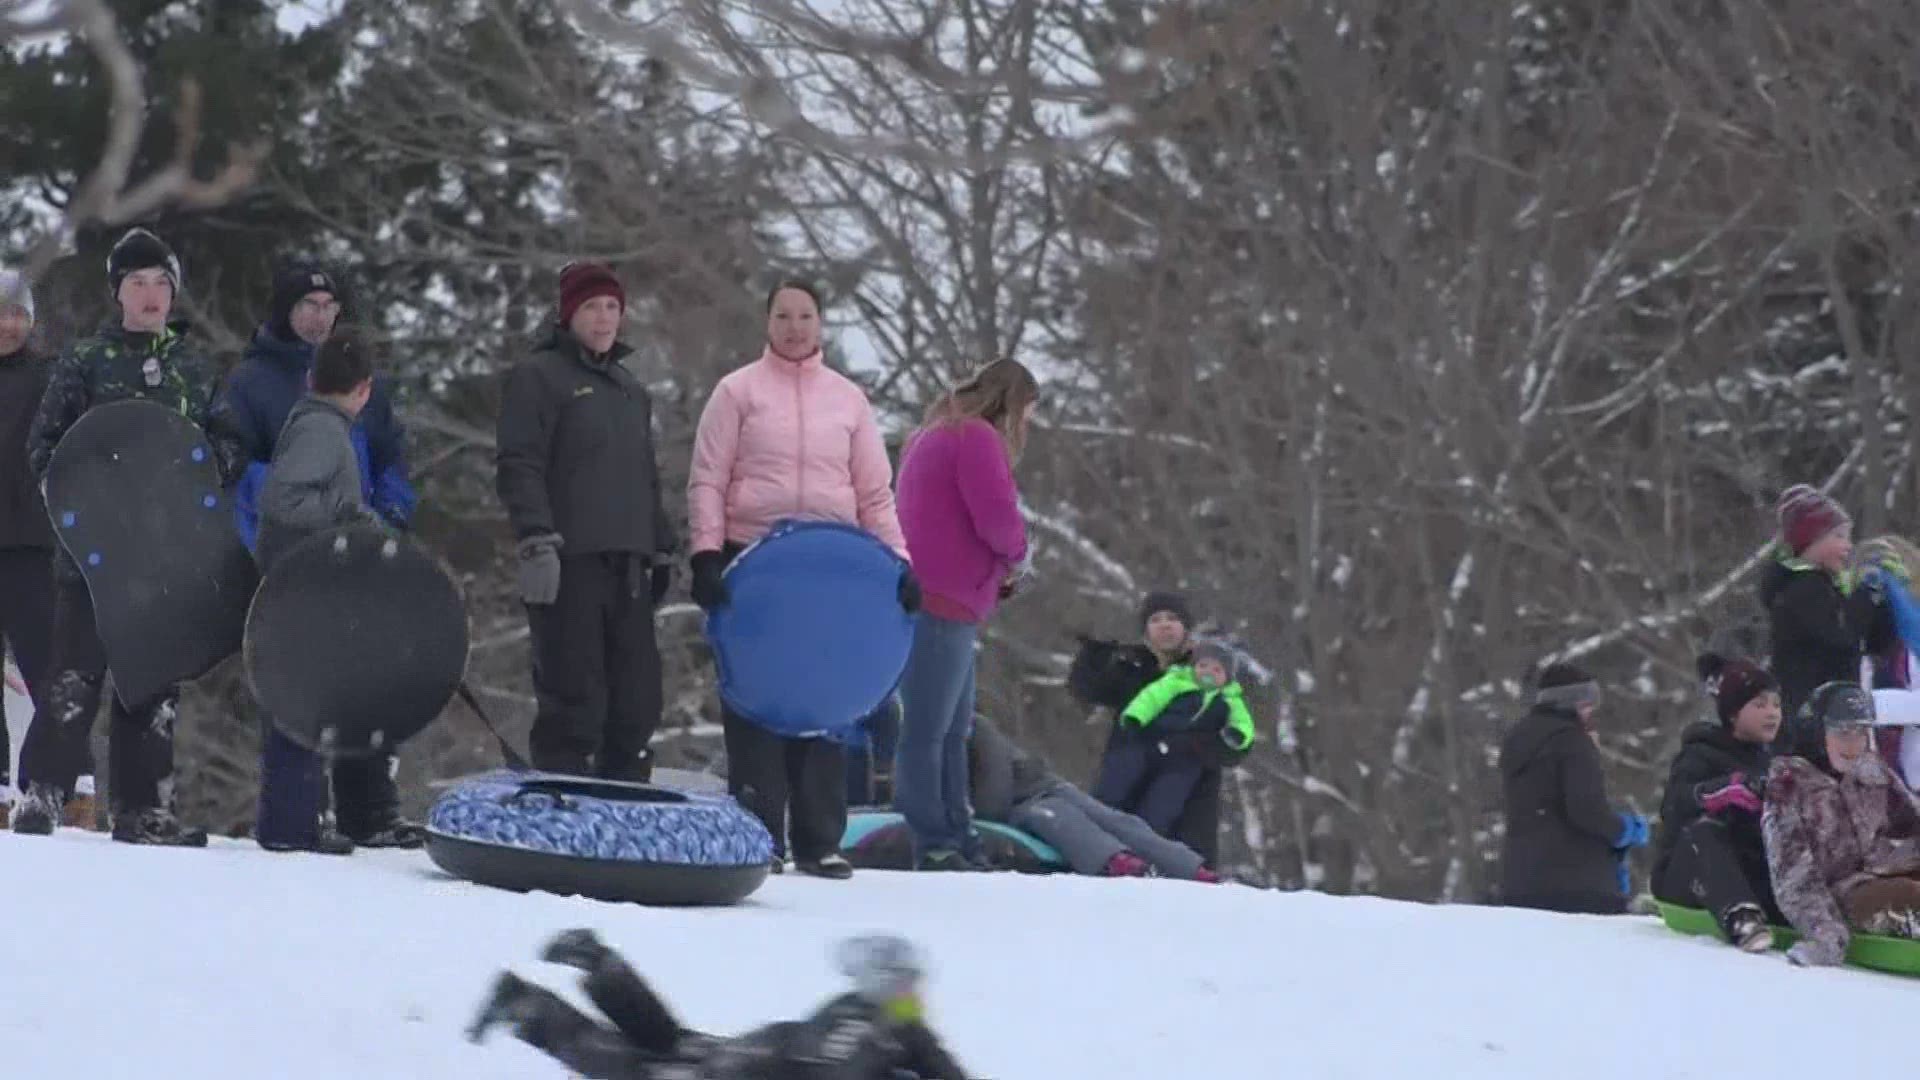 Mainers in Bangor are finding ways to have fun this winter despite the pandemic.